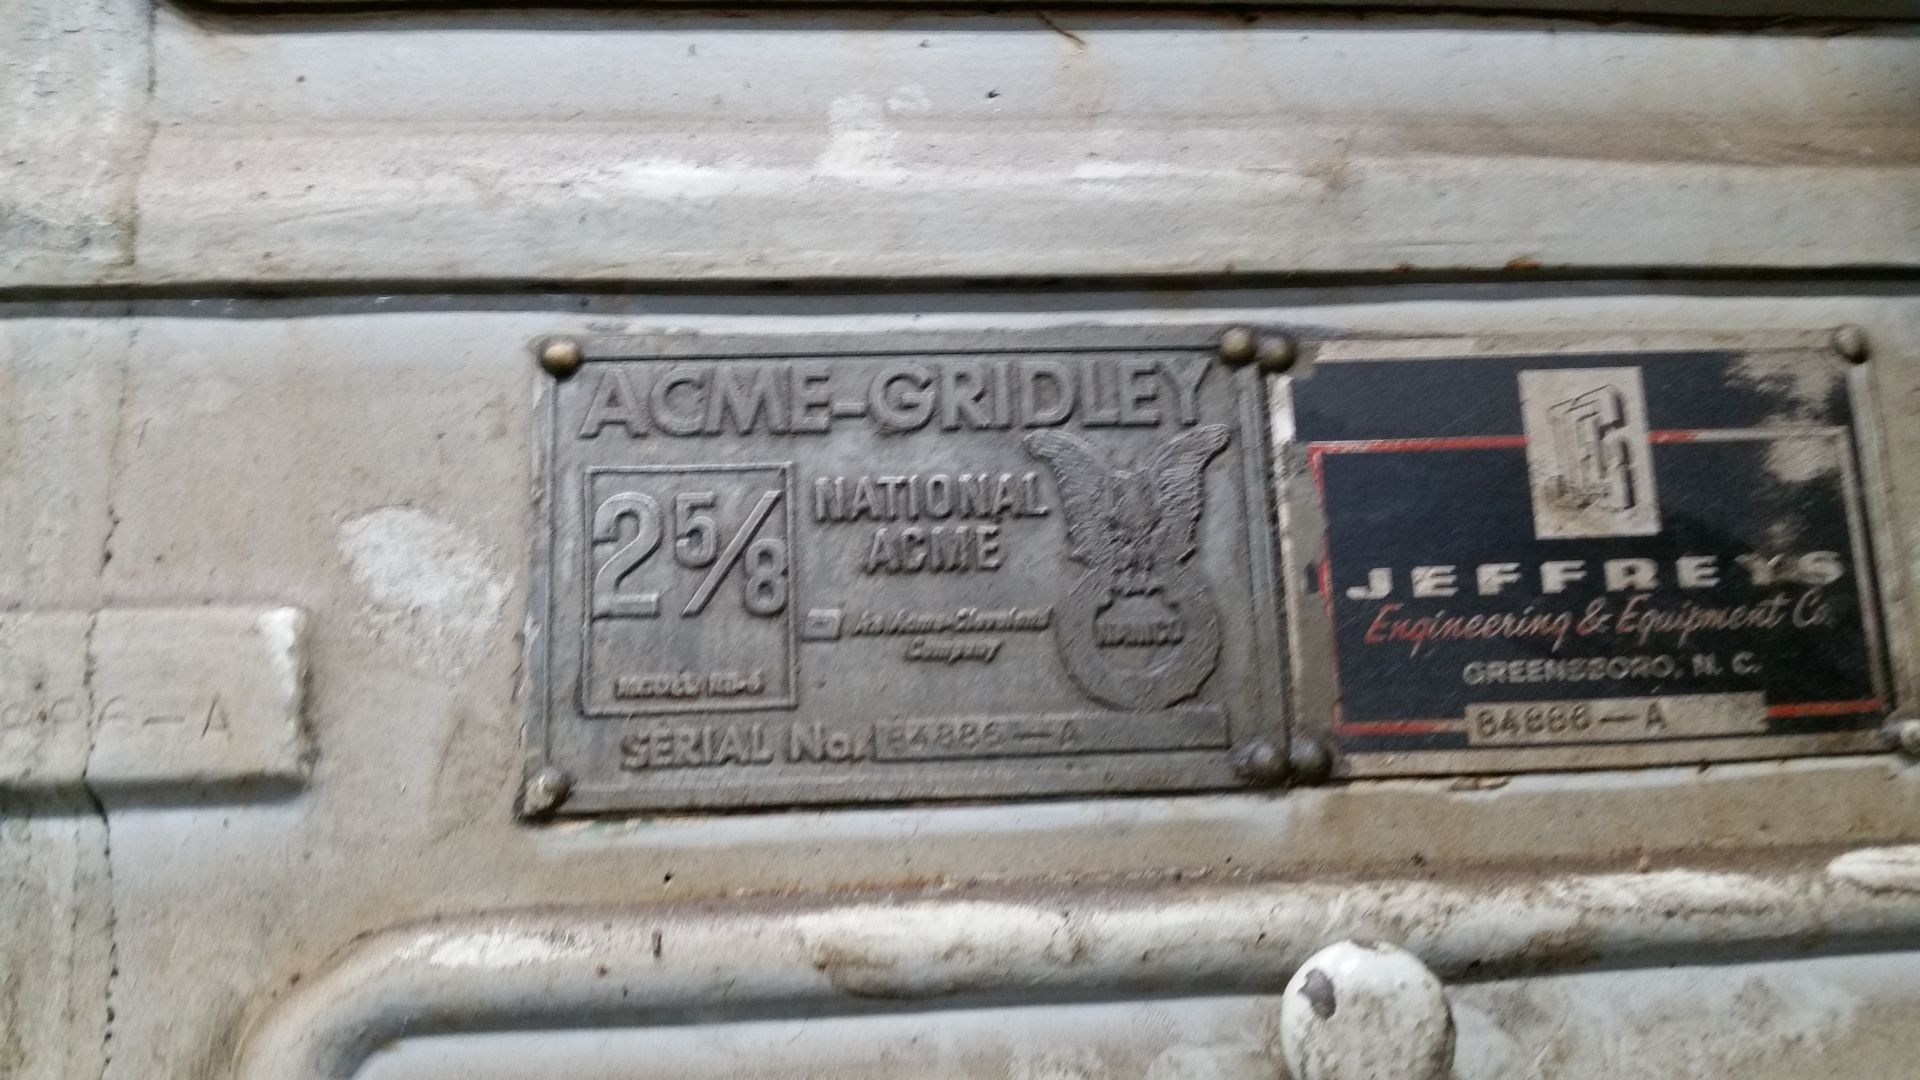 ACME GRIDLEY MODEL 2-5/8 RB 6 SCREW MACHINE - Image 5 of 8